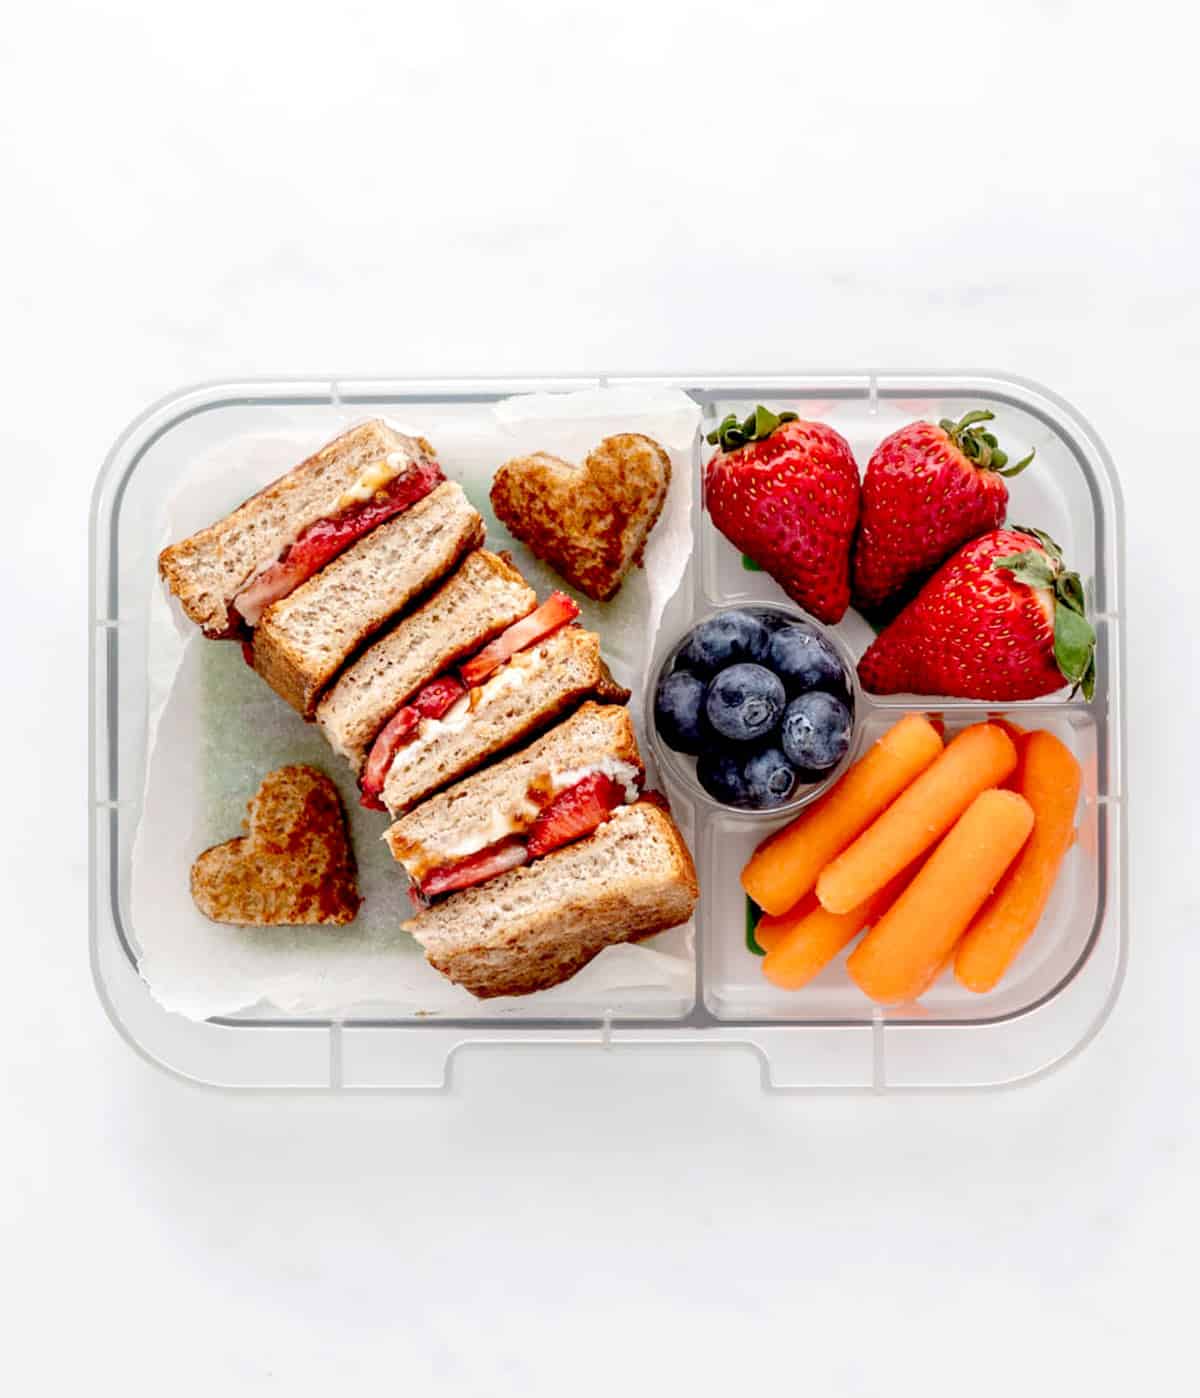 A strawberry cream cheese banana French toast sandwich in a lunch box with strawberries, blueberries and carrot sticks.